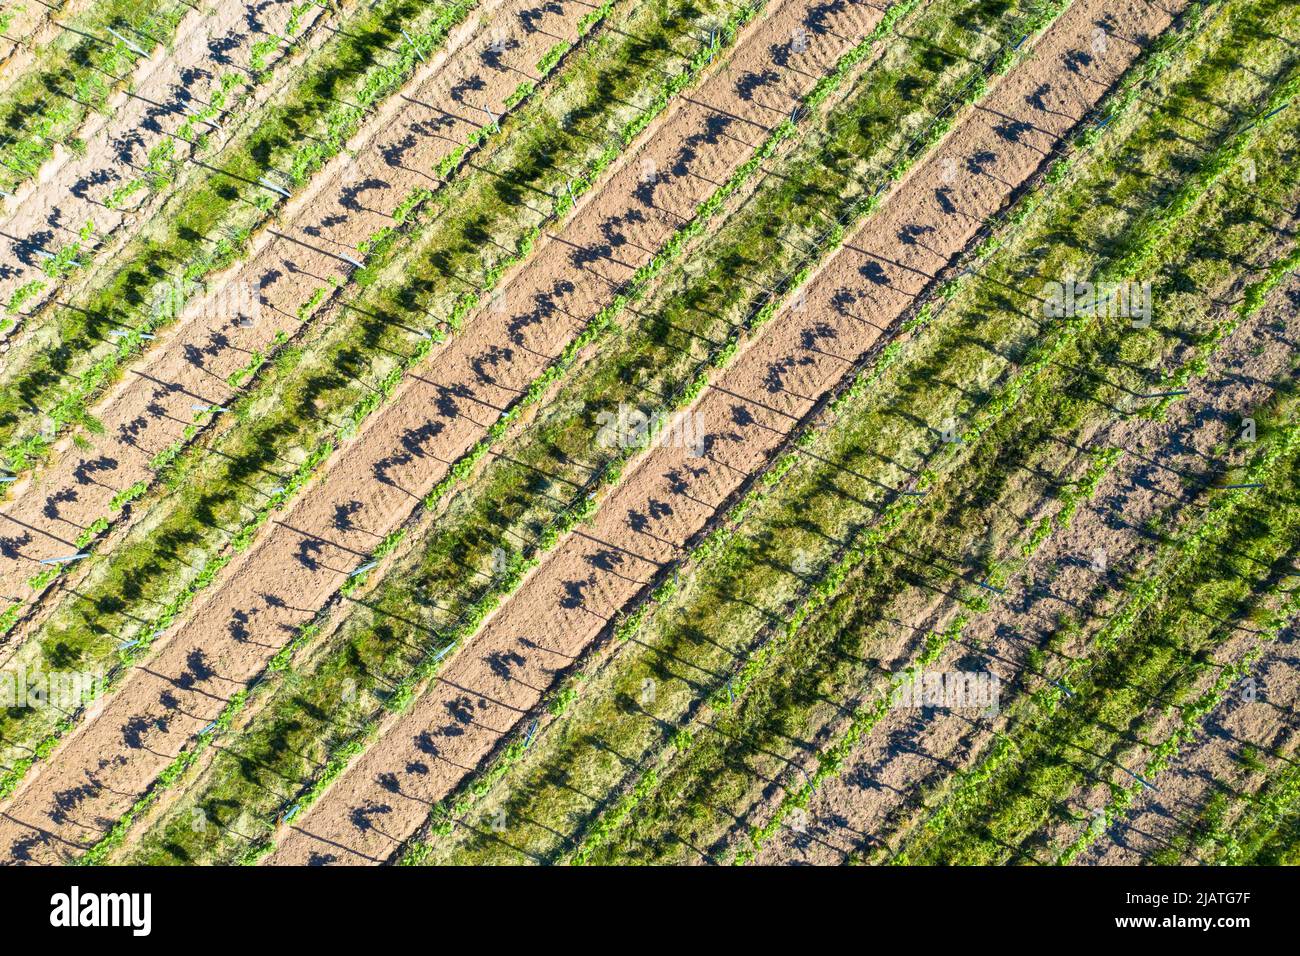 Aerial view of Vineyard and grapevines. Grape vines in rows fresh plants with green leaves. Waiting for harvest and the new wine. Rows in a vineyard, Stock Photo